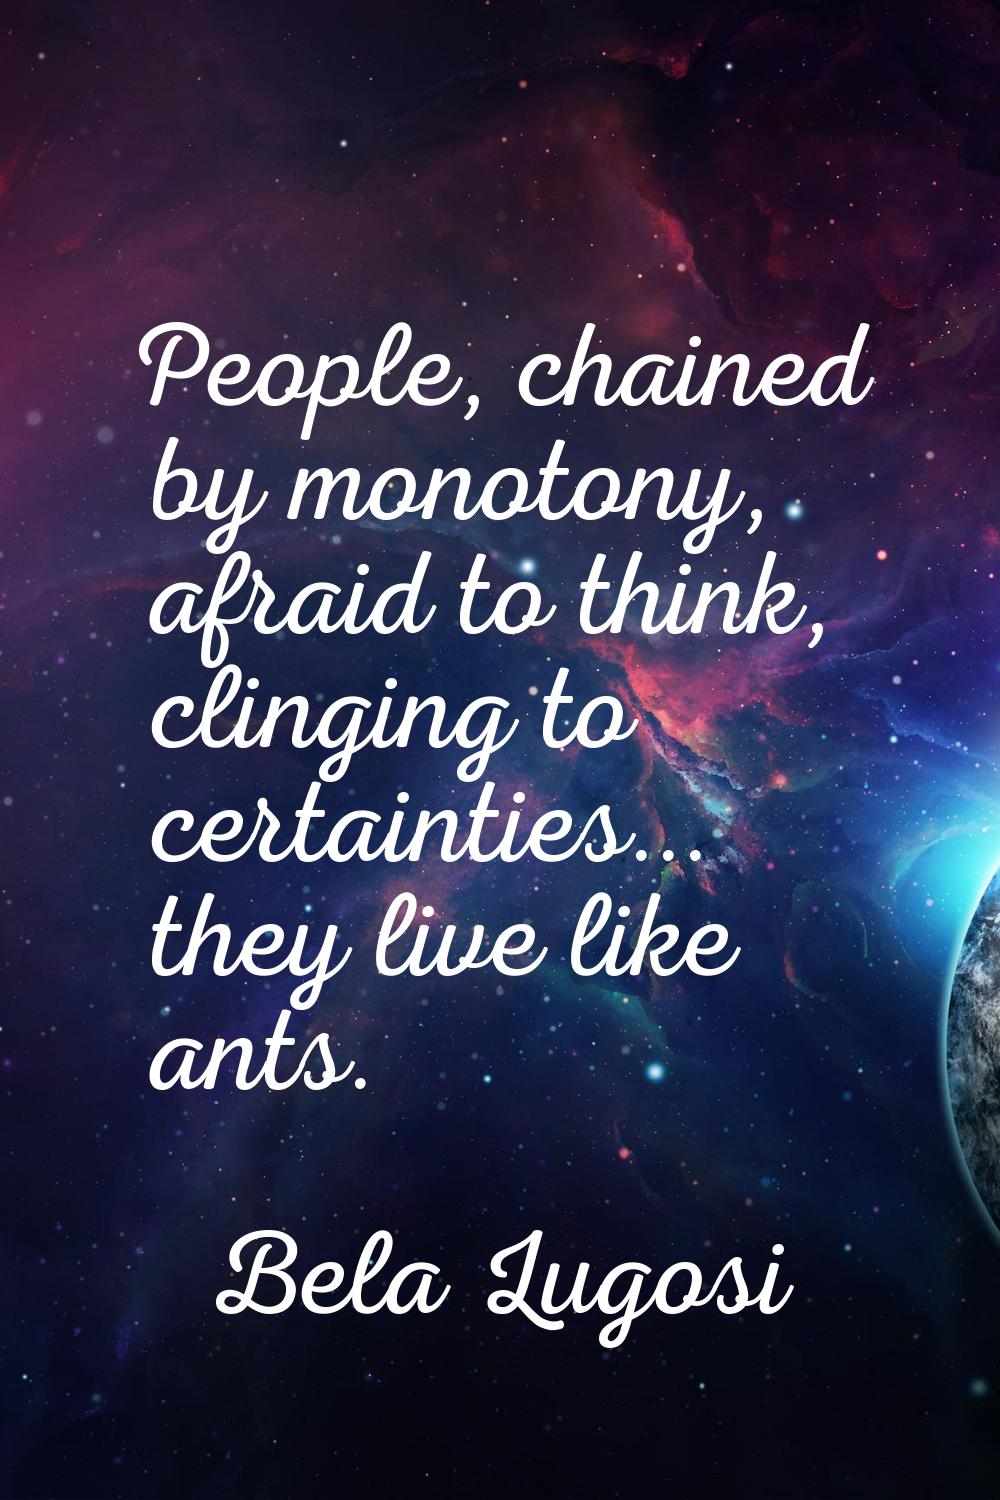 People, chained by monotony, afraid to think, clinging to certainties... they live like ants.